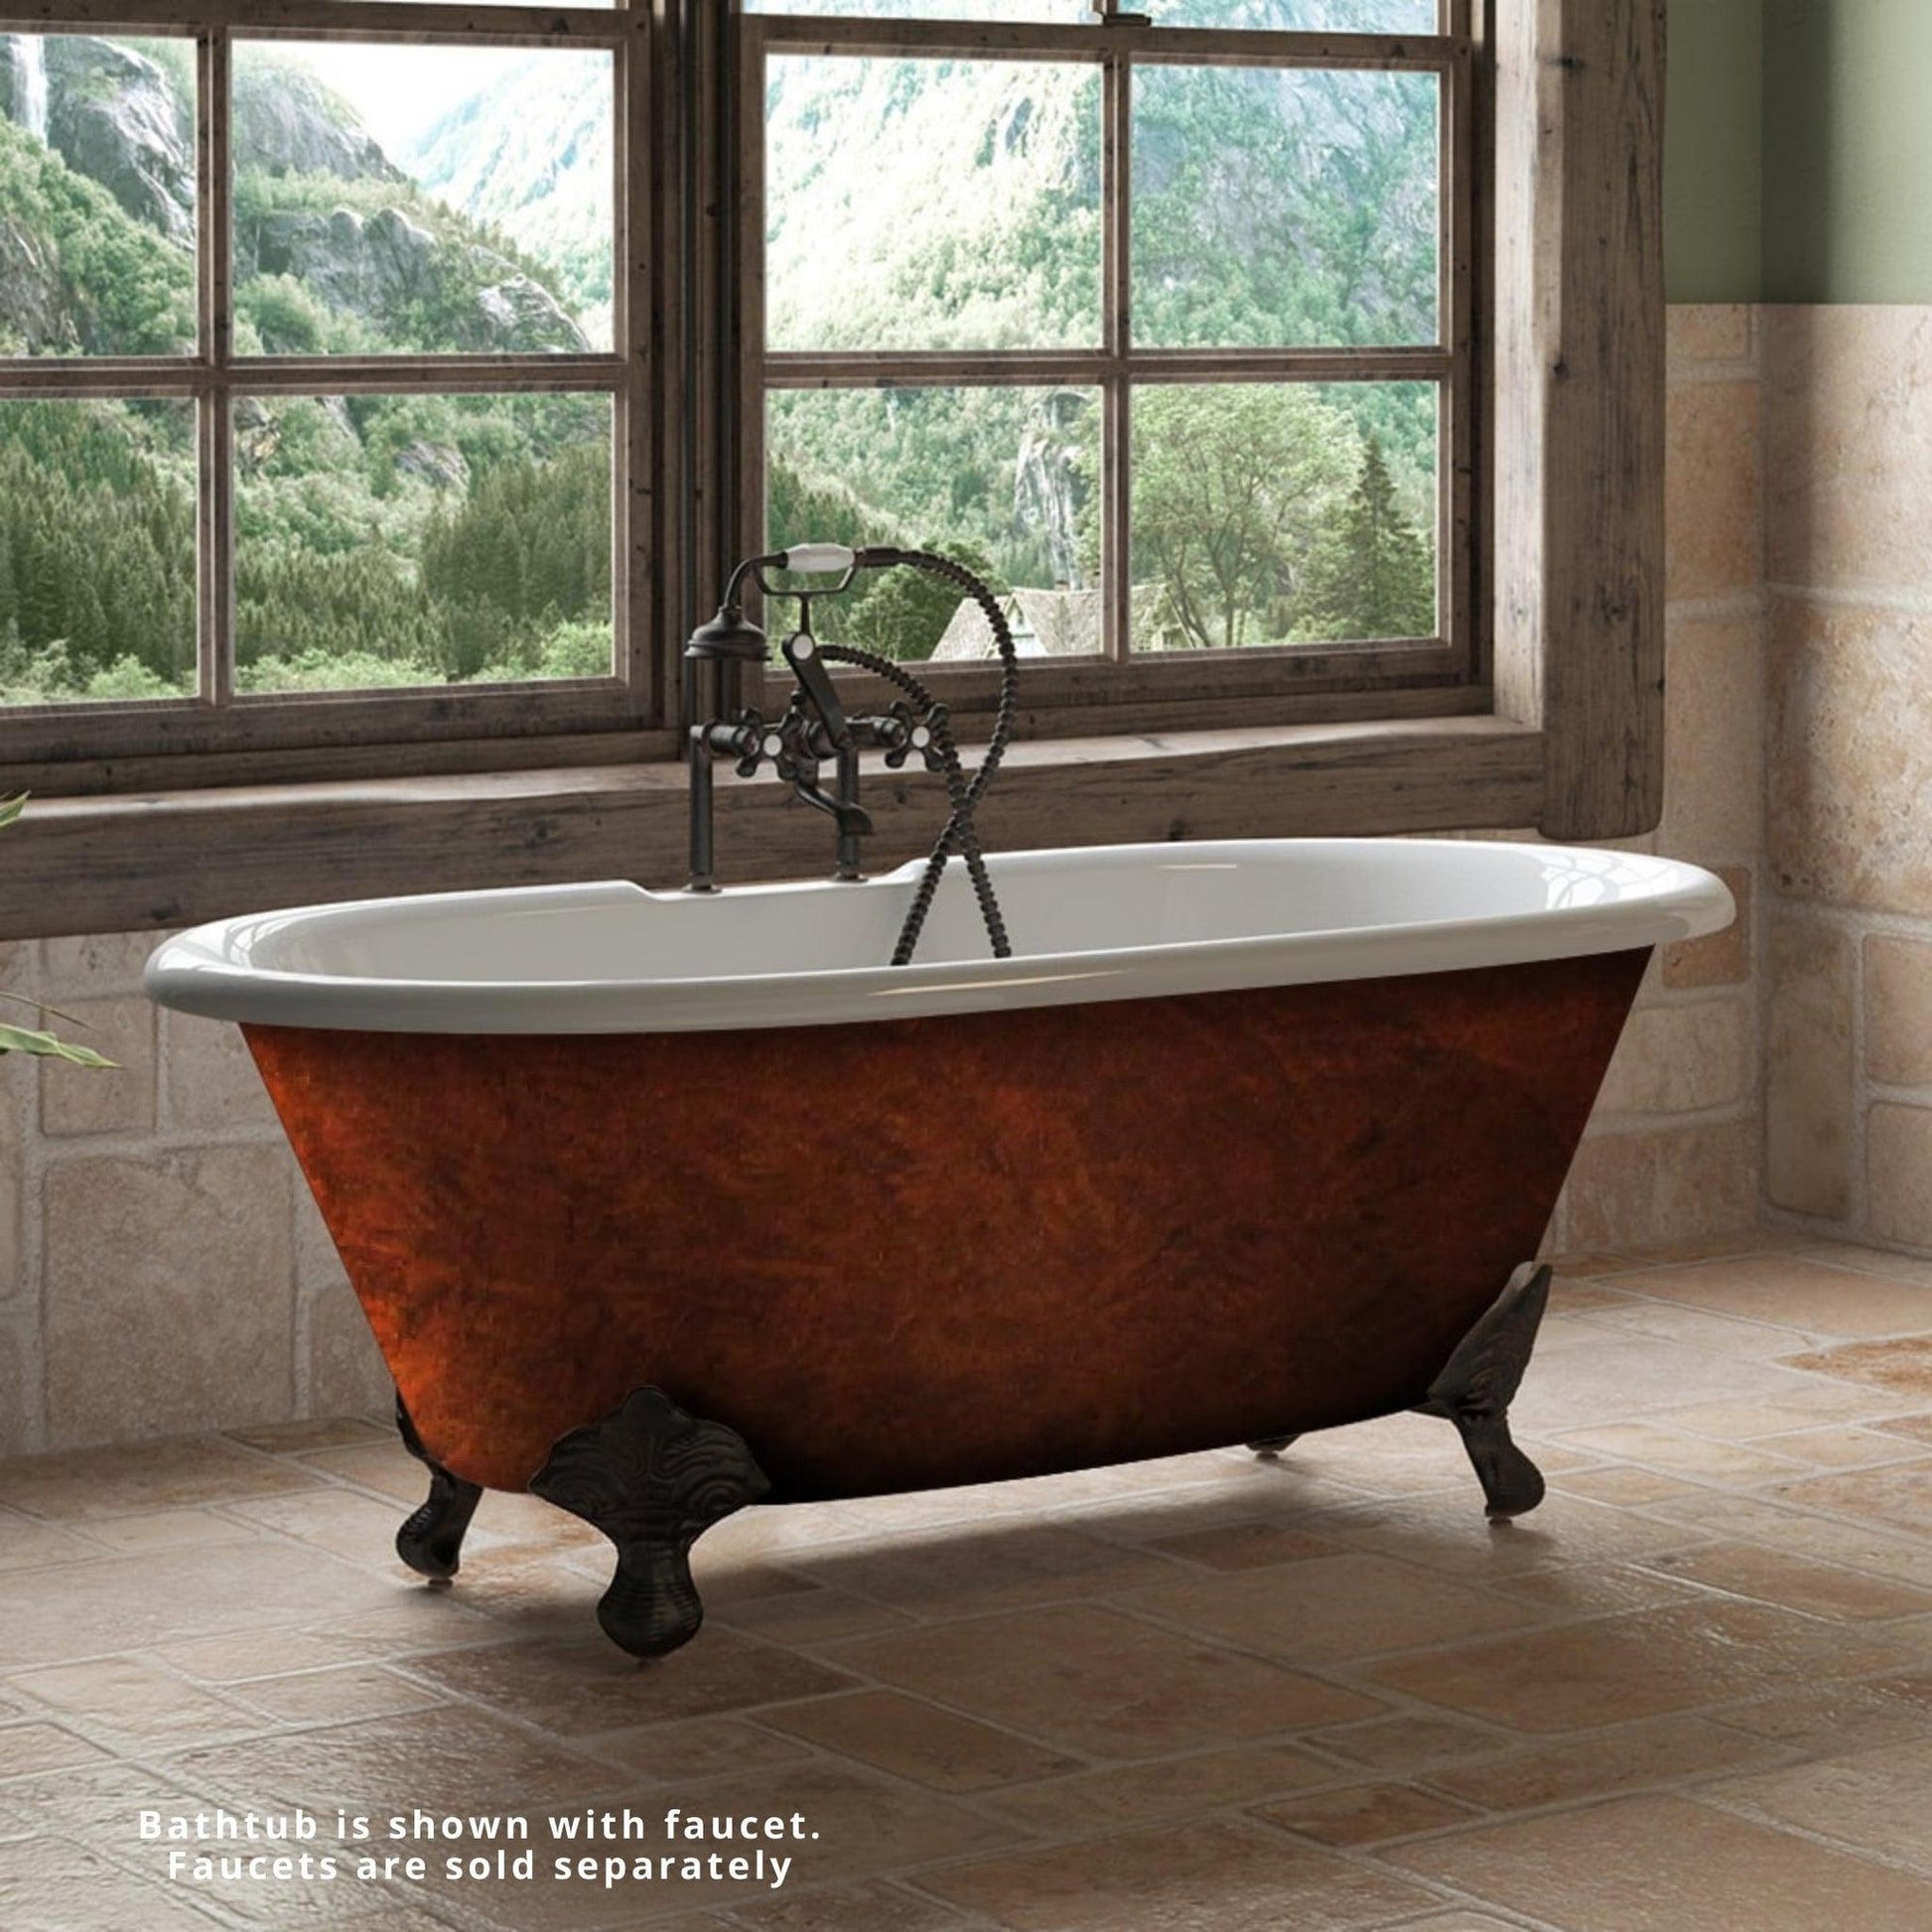 Cambridge Plumbing 67" Hand Painted Copper Bronze Cast Iron Double Ended Bathtub With Deck Holes With Oil Rubbed Bronze Feet